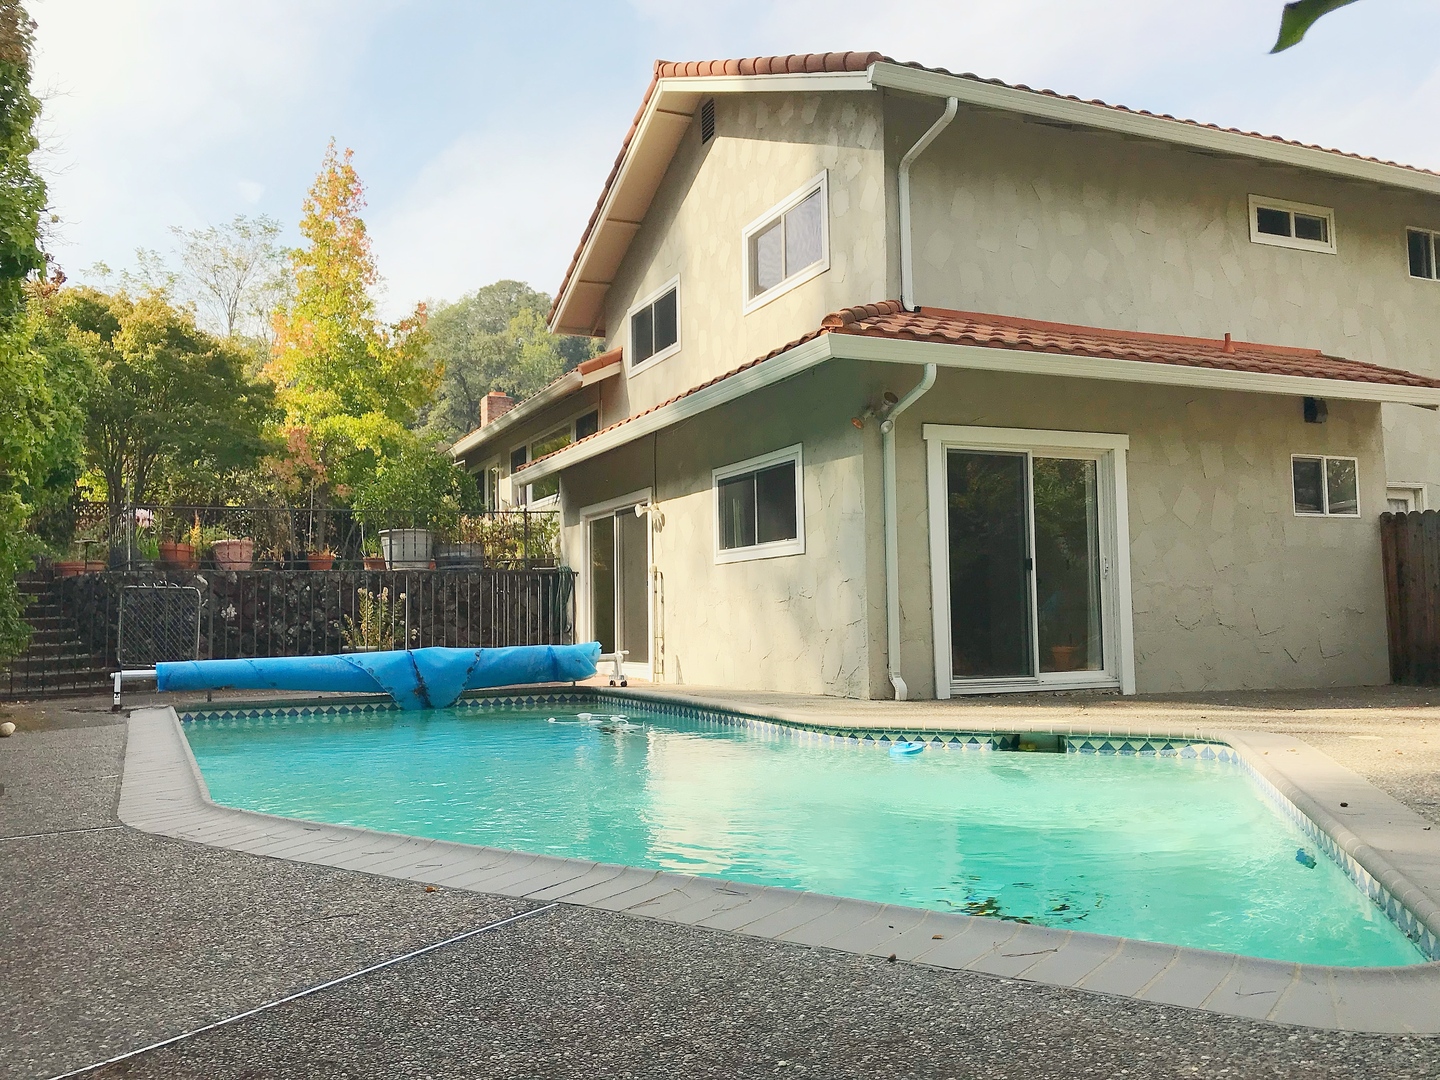 Beautifully Updated Home at end of cul-de-sac with Pool